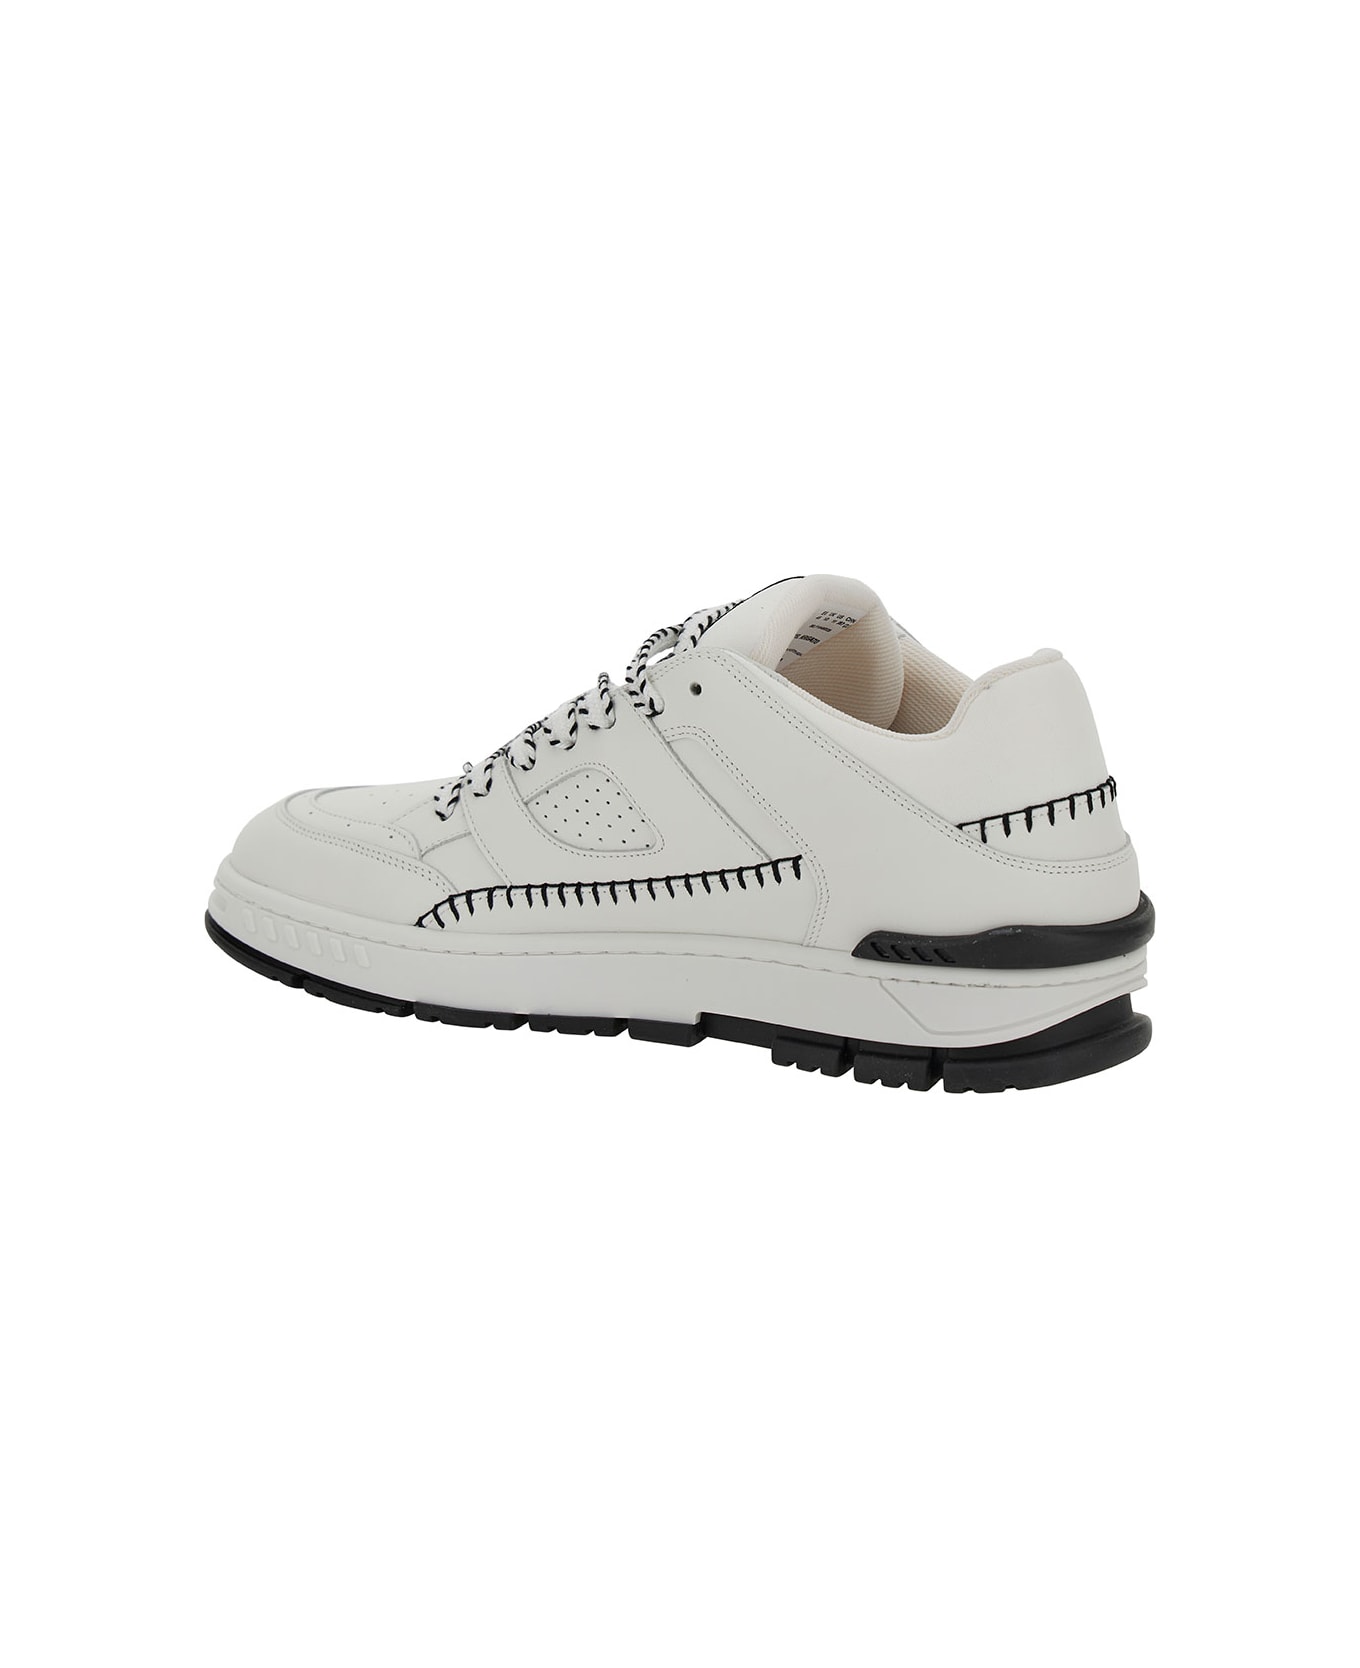 Axel Arigato 'area Lo Sneaker Stitch' White Low Top Sneakers With Contrasting Stitch Detail In Leather Man - White